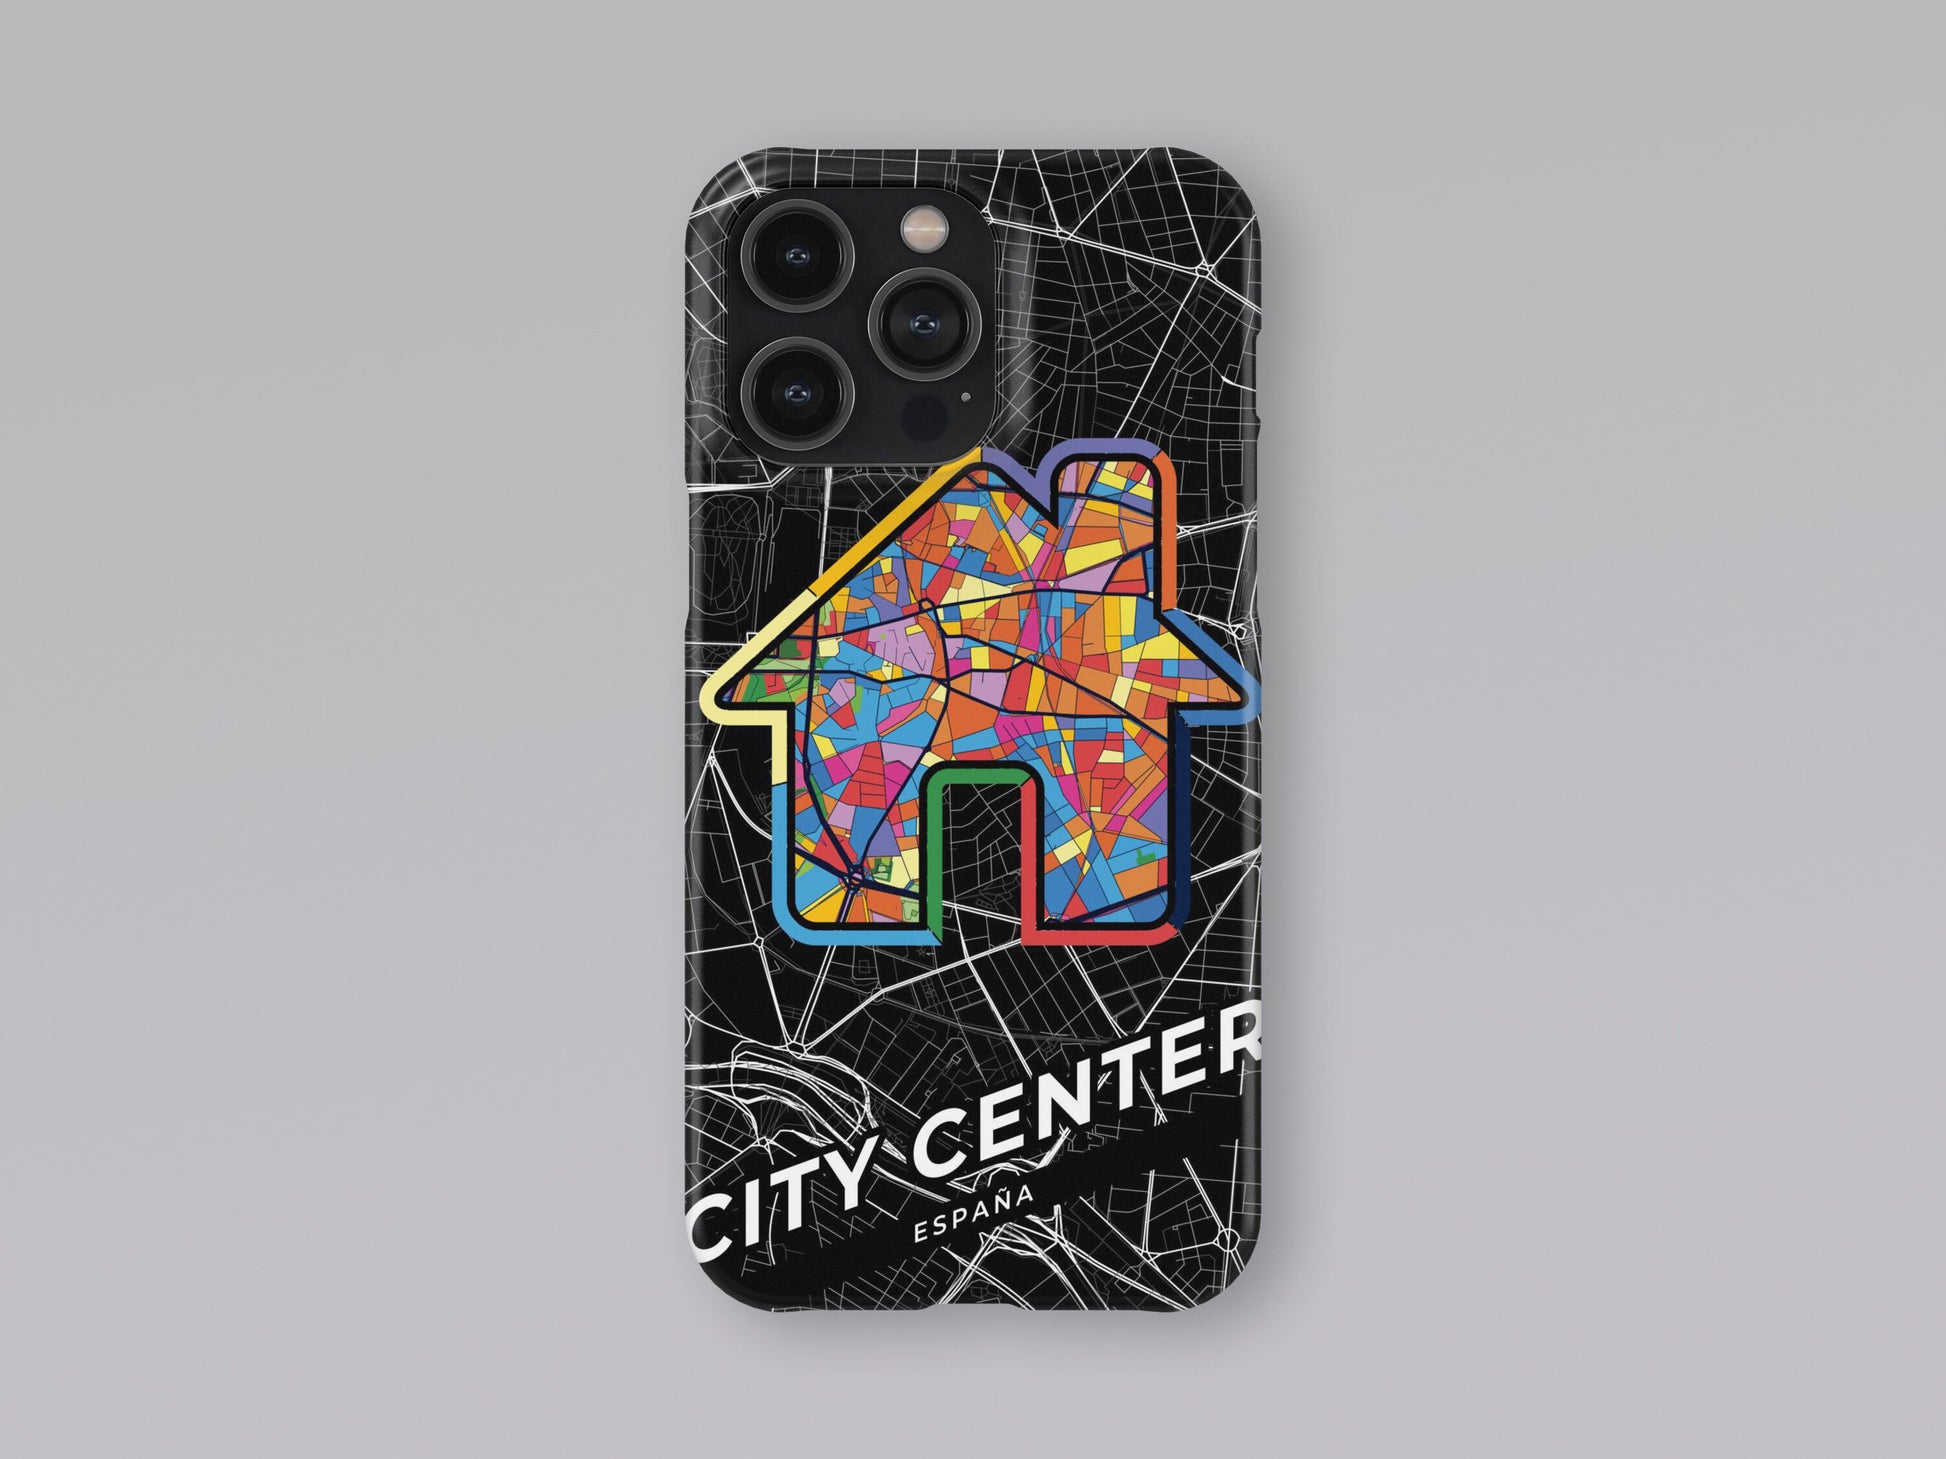 City Center Spain slim phone case with colorful icon. Birthday, wedding or housewarming gift. Couple match cases. 3